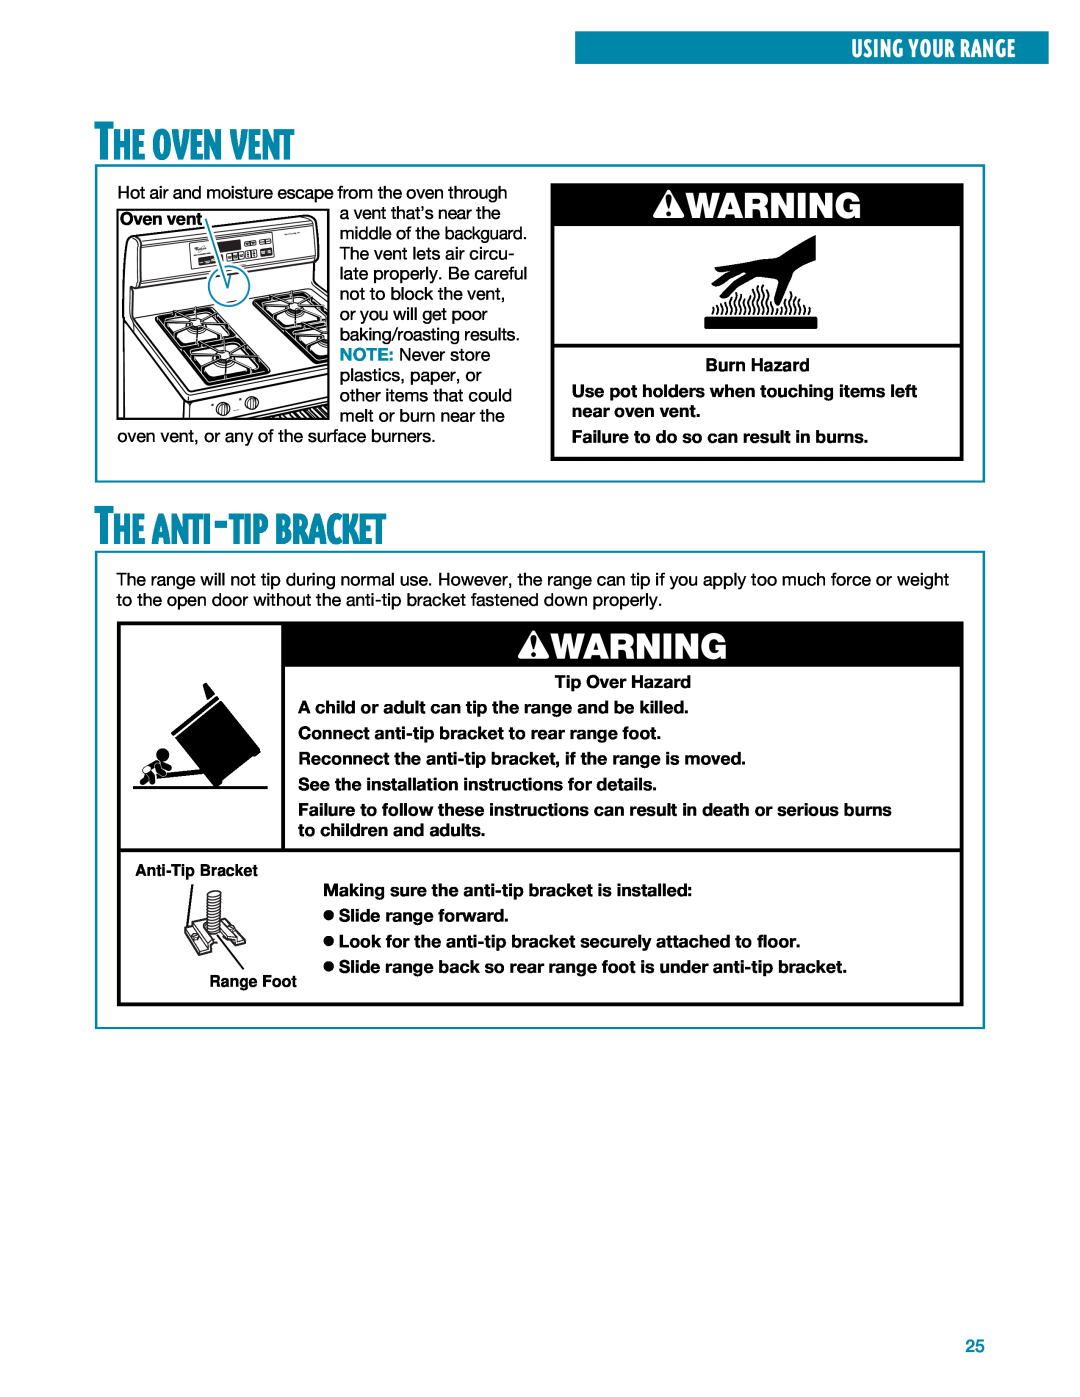 Whirlpool SF395LEE manual The Oven Vent, The Anti-Tipbracket, wWARNING, Using Your Range 